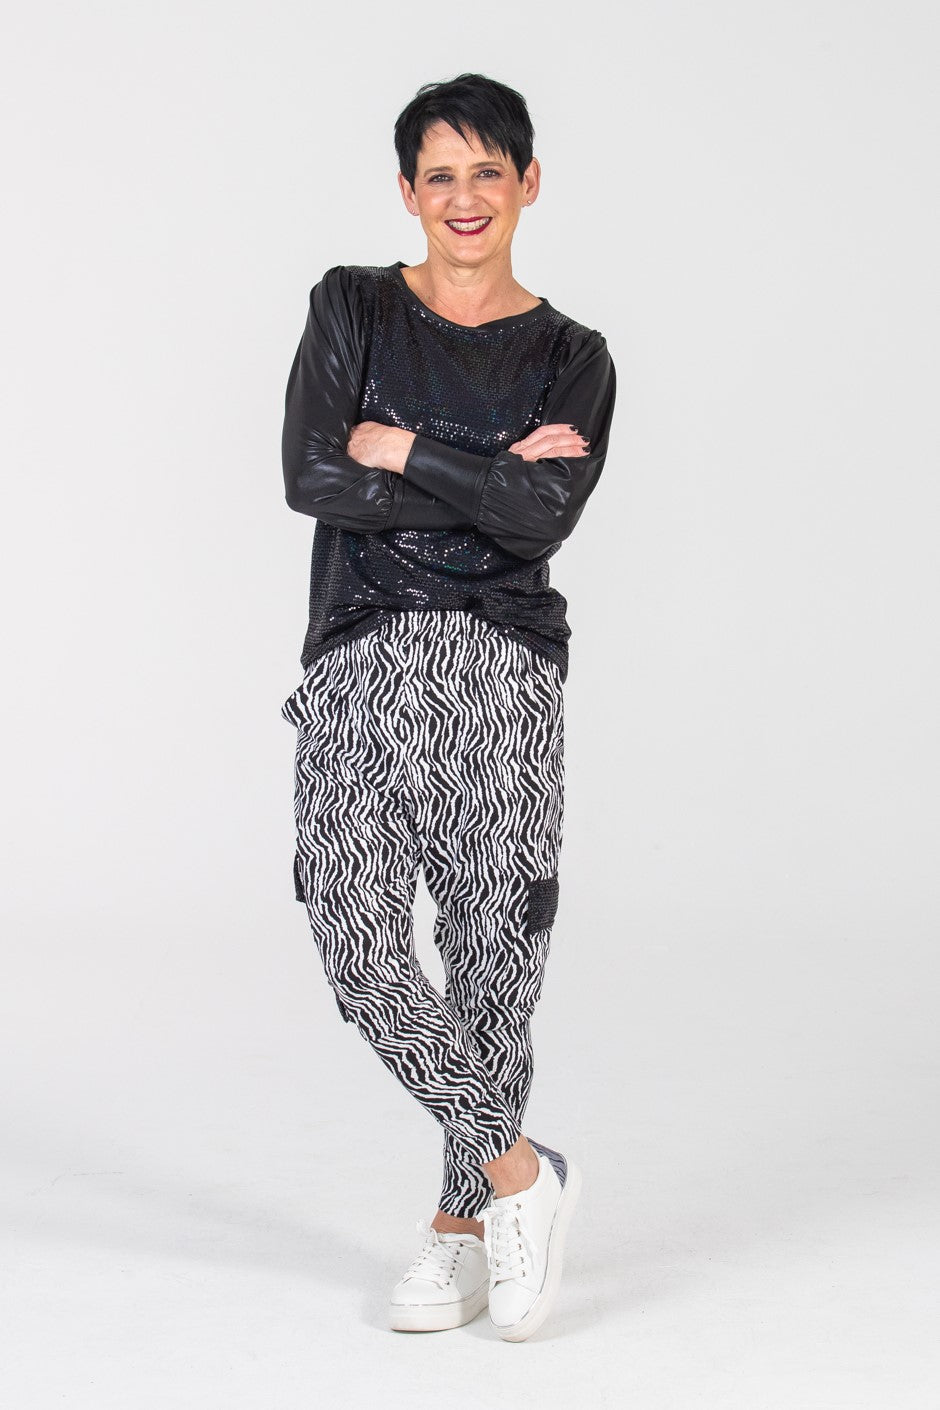 Tiggy Cargo Pants - Black and White (with Bling!)